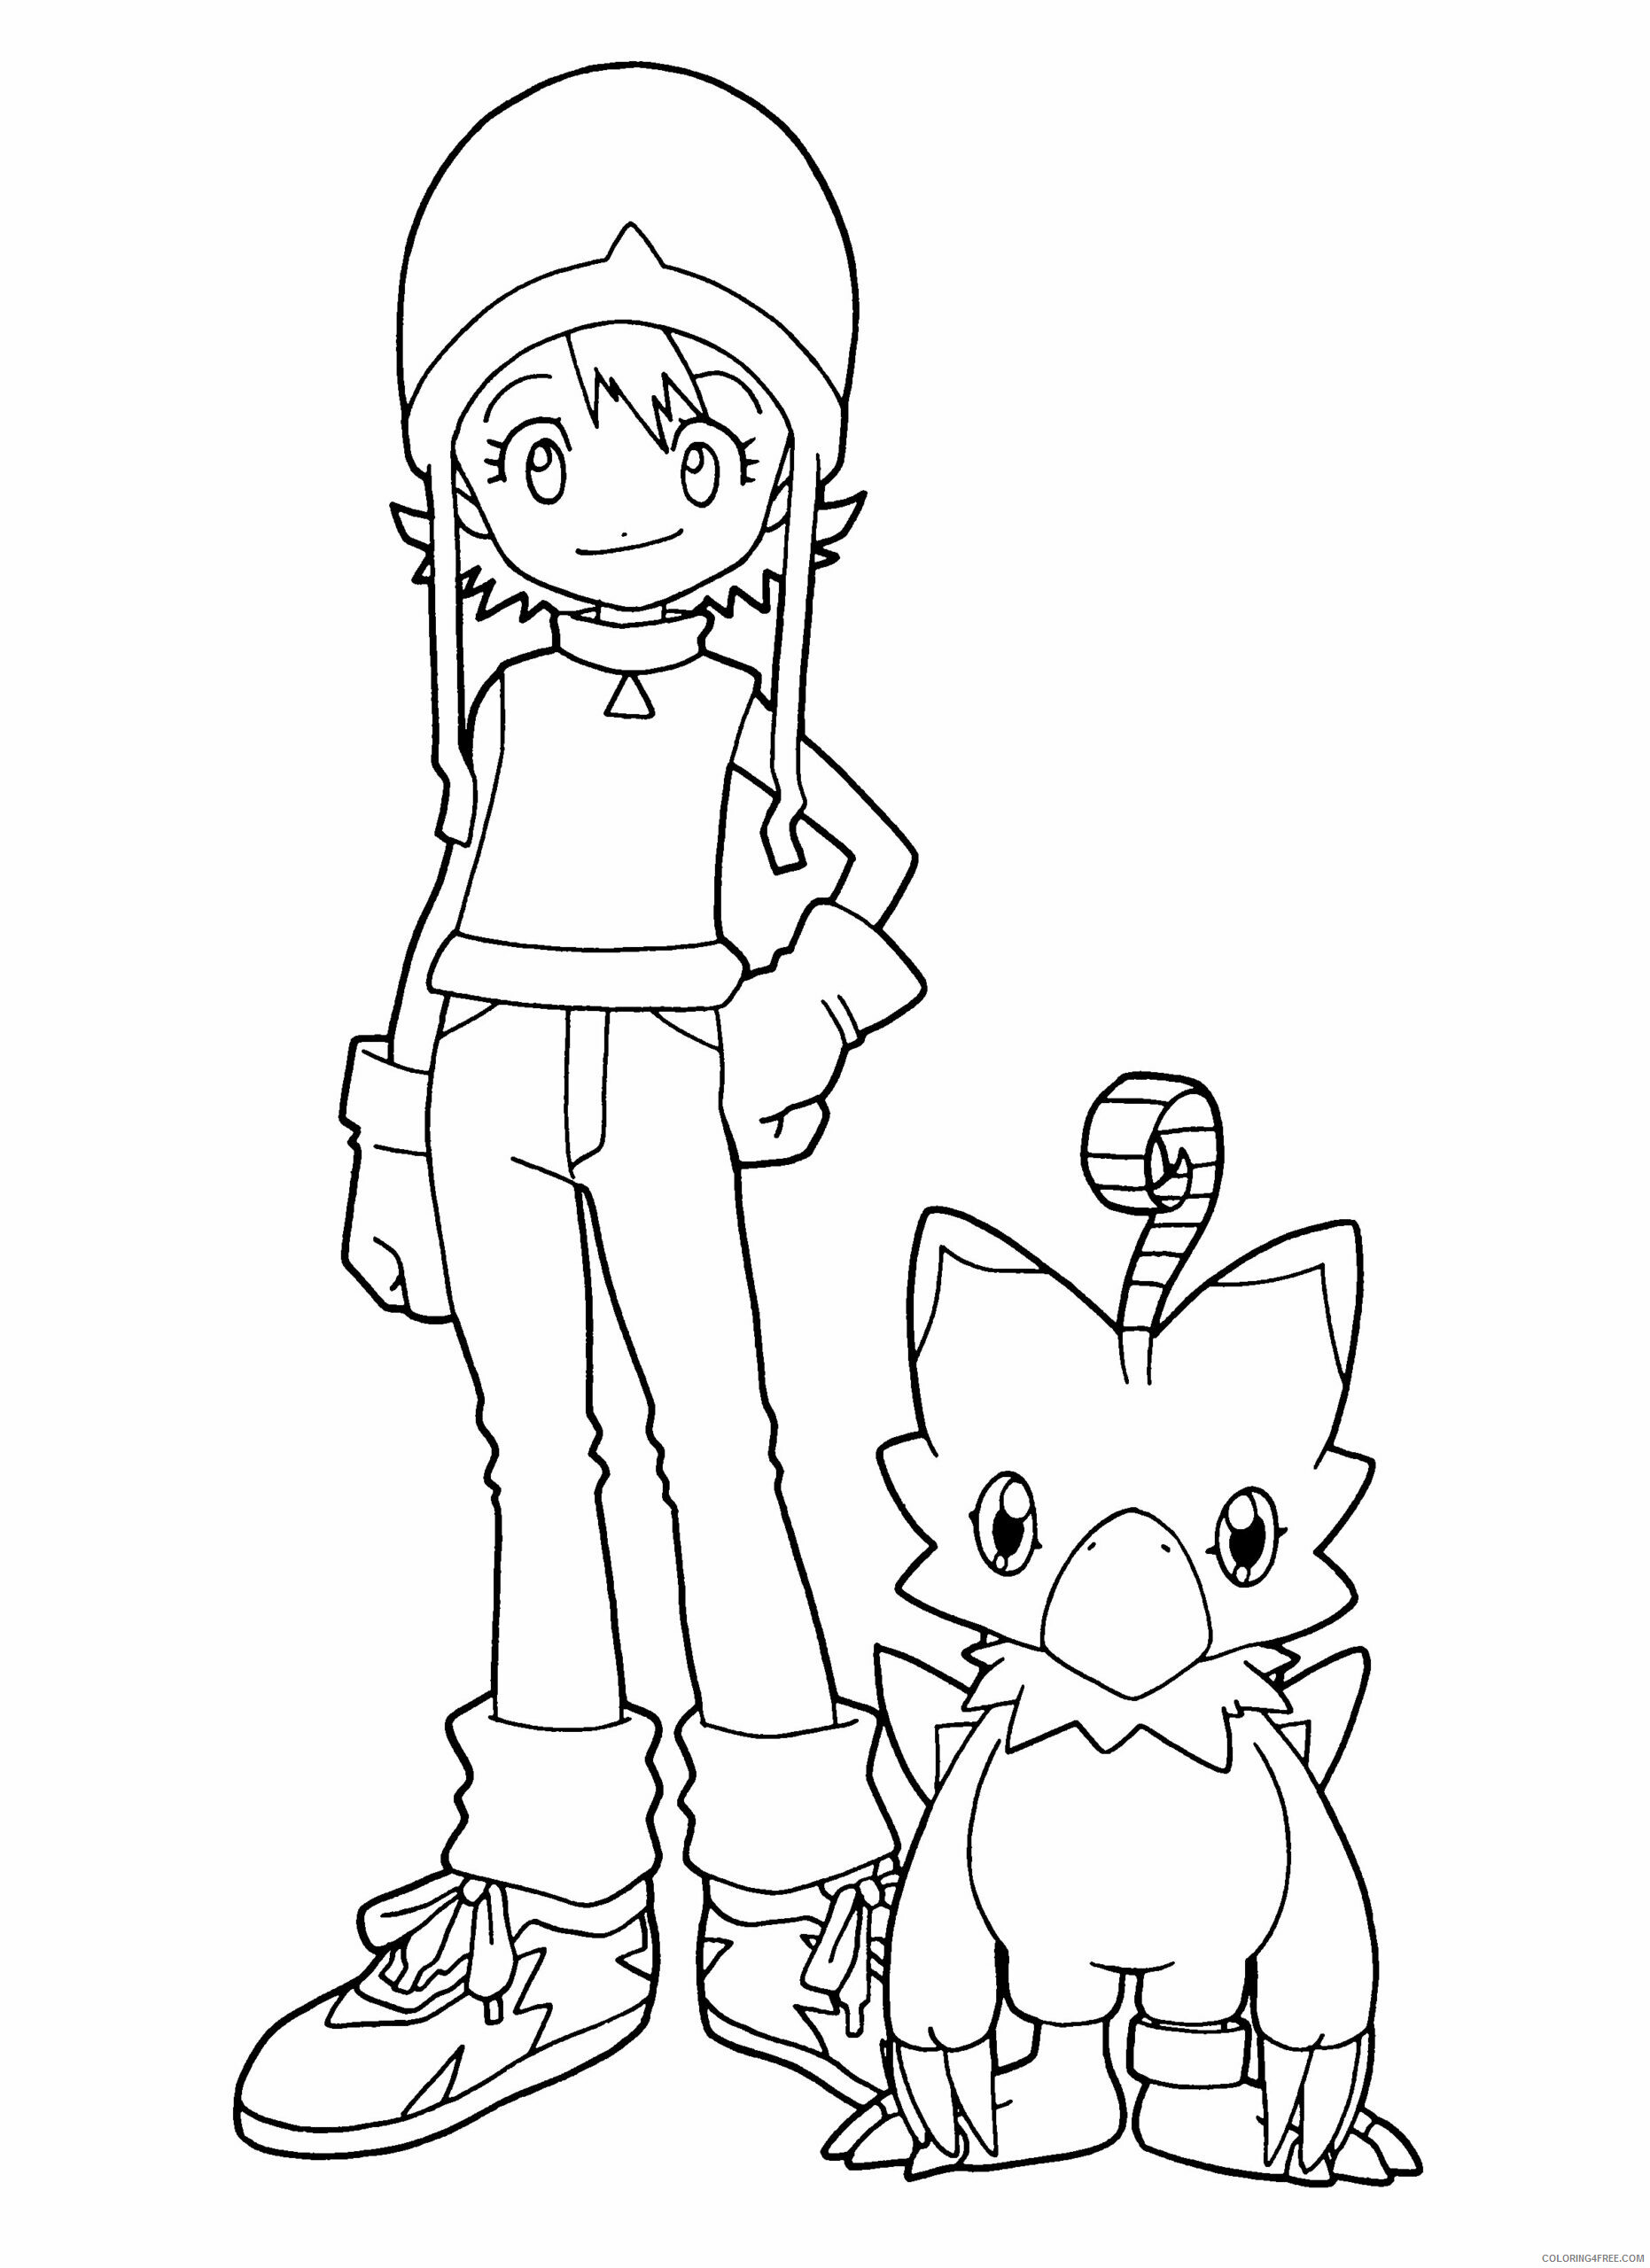 Digimon Printable Coloring Pages Anime digimon 98 2021 0395 Coloring4free